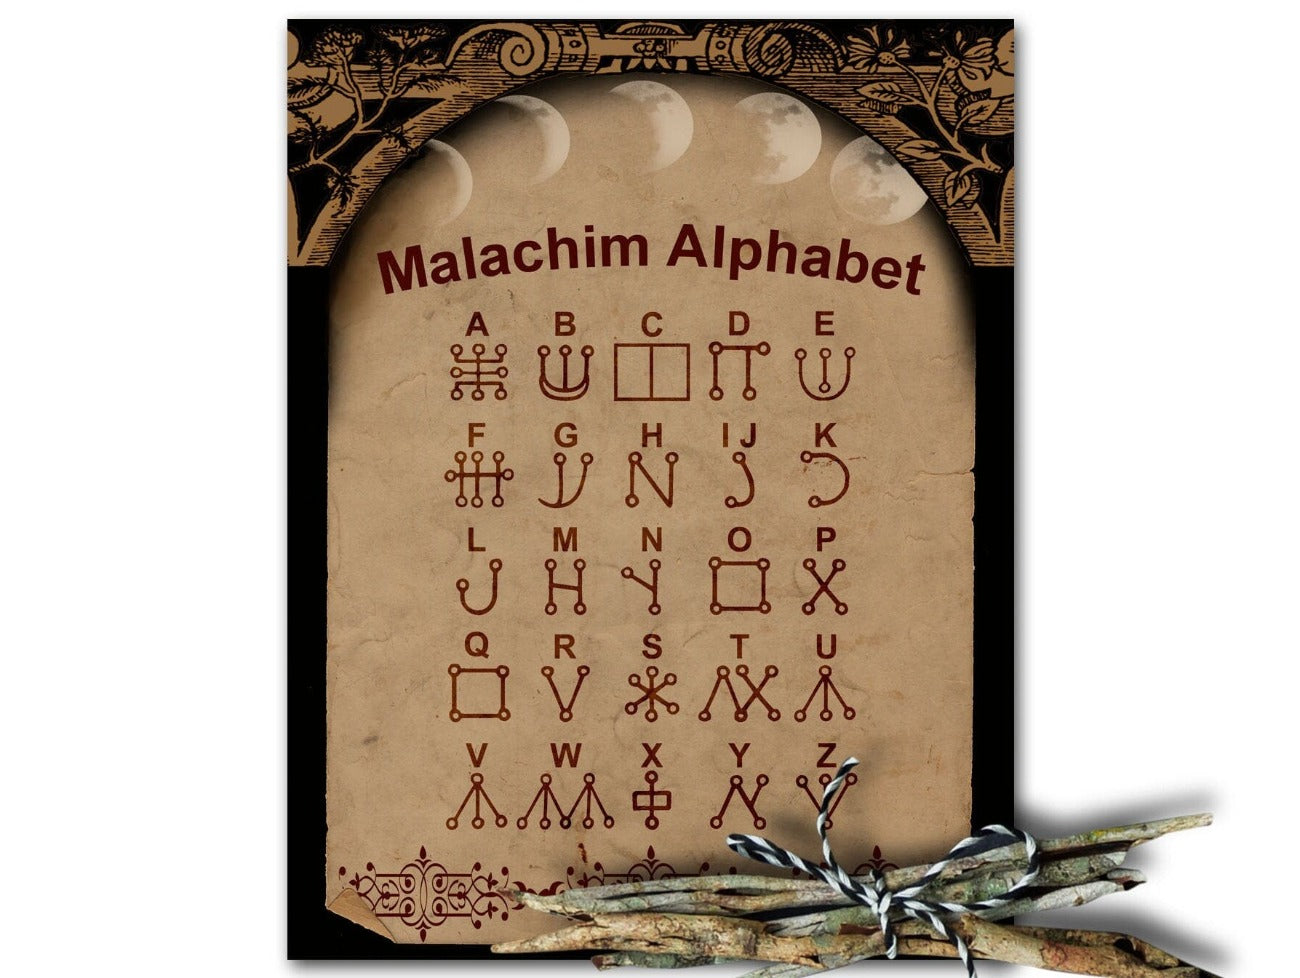 MALACHIM ALPHABET, Celestial Writing of Angels and Messengers, Secret Witchcraft Script, Ancient Wicca Alphabet for Spells and Incantations - Morgana Magick Spell